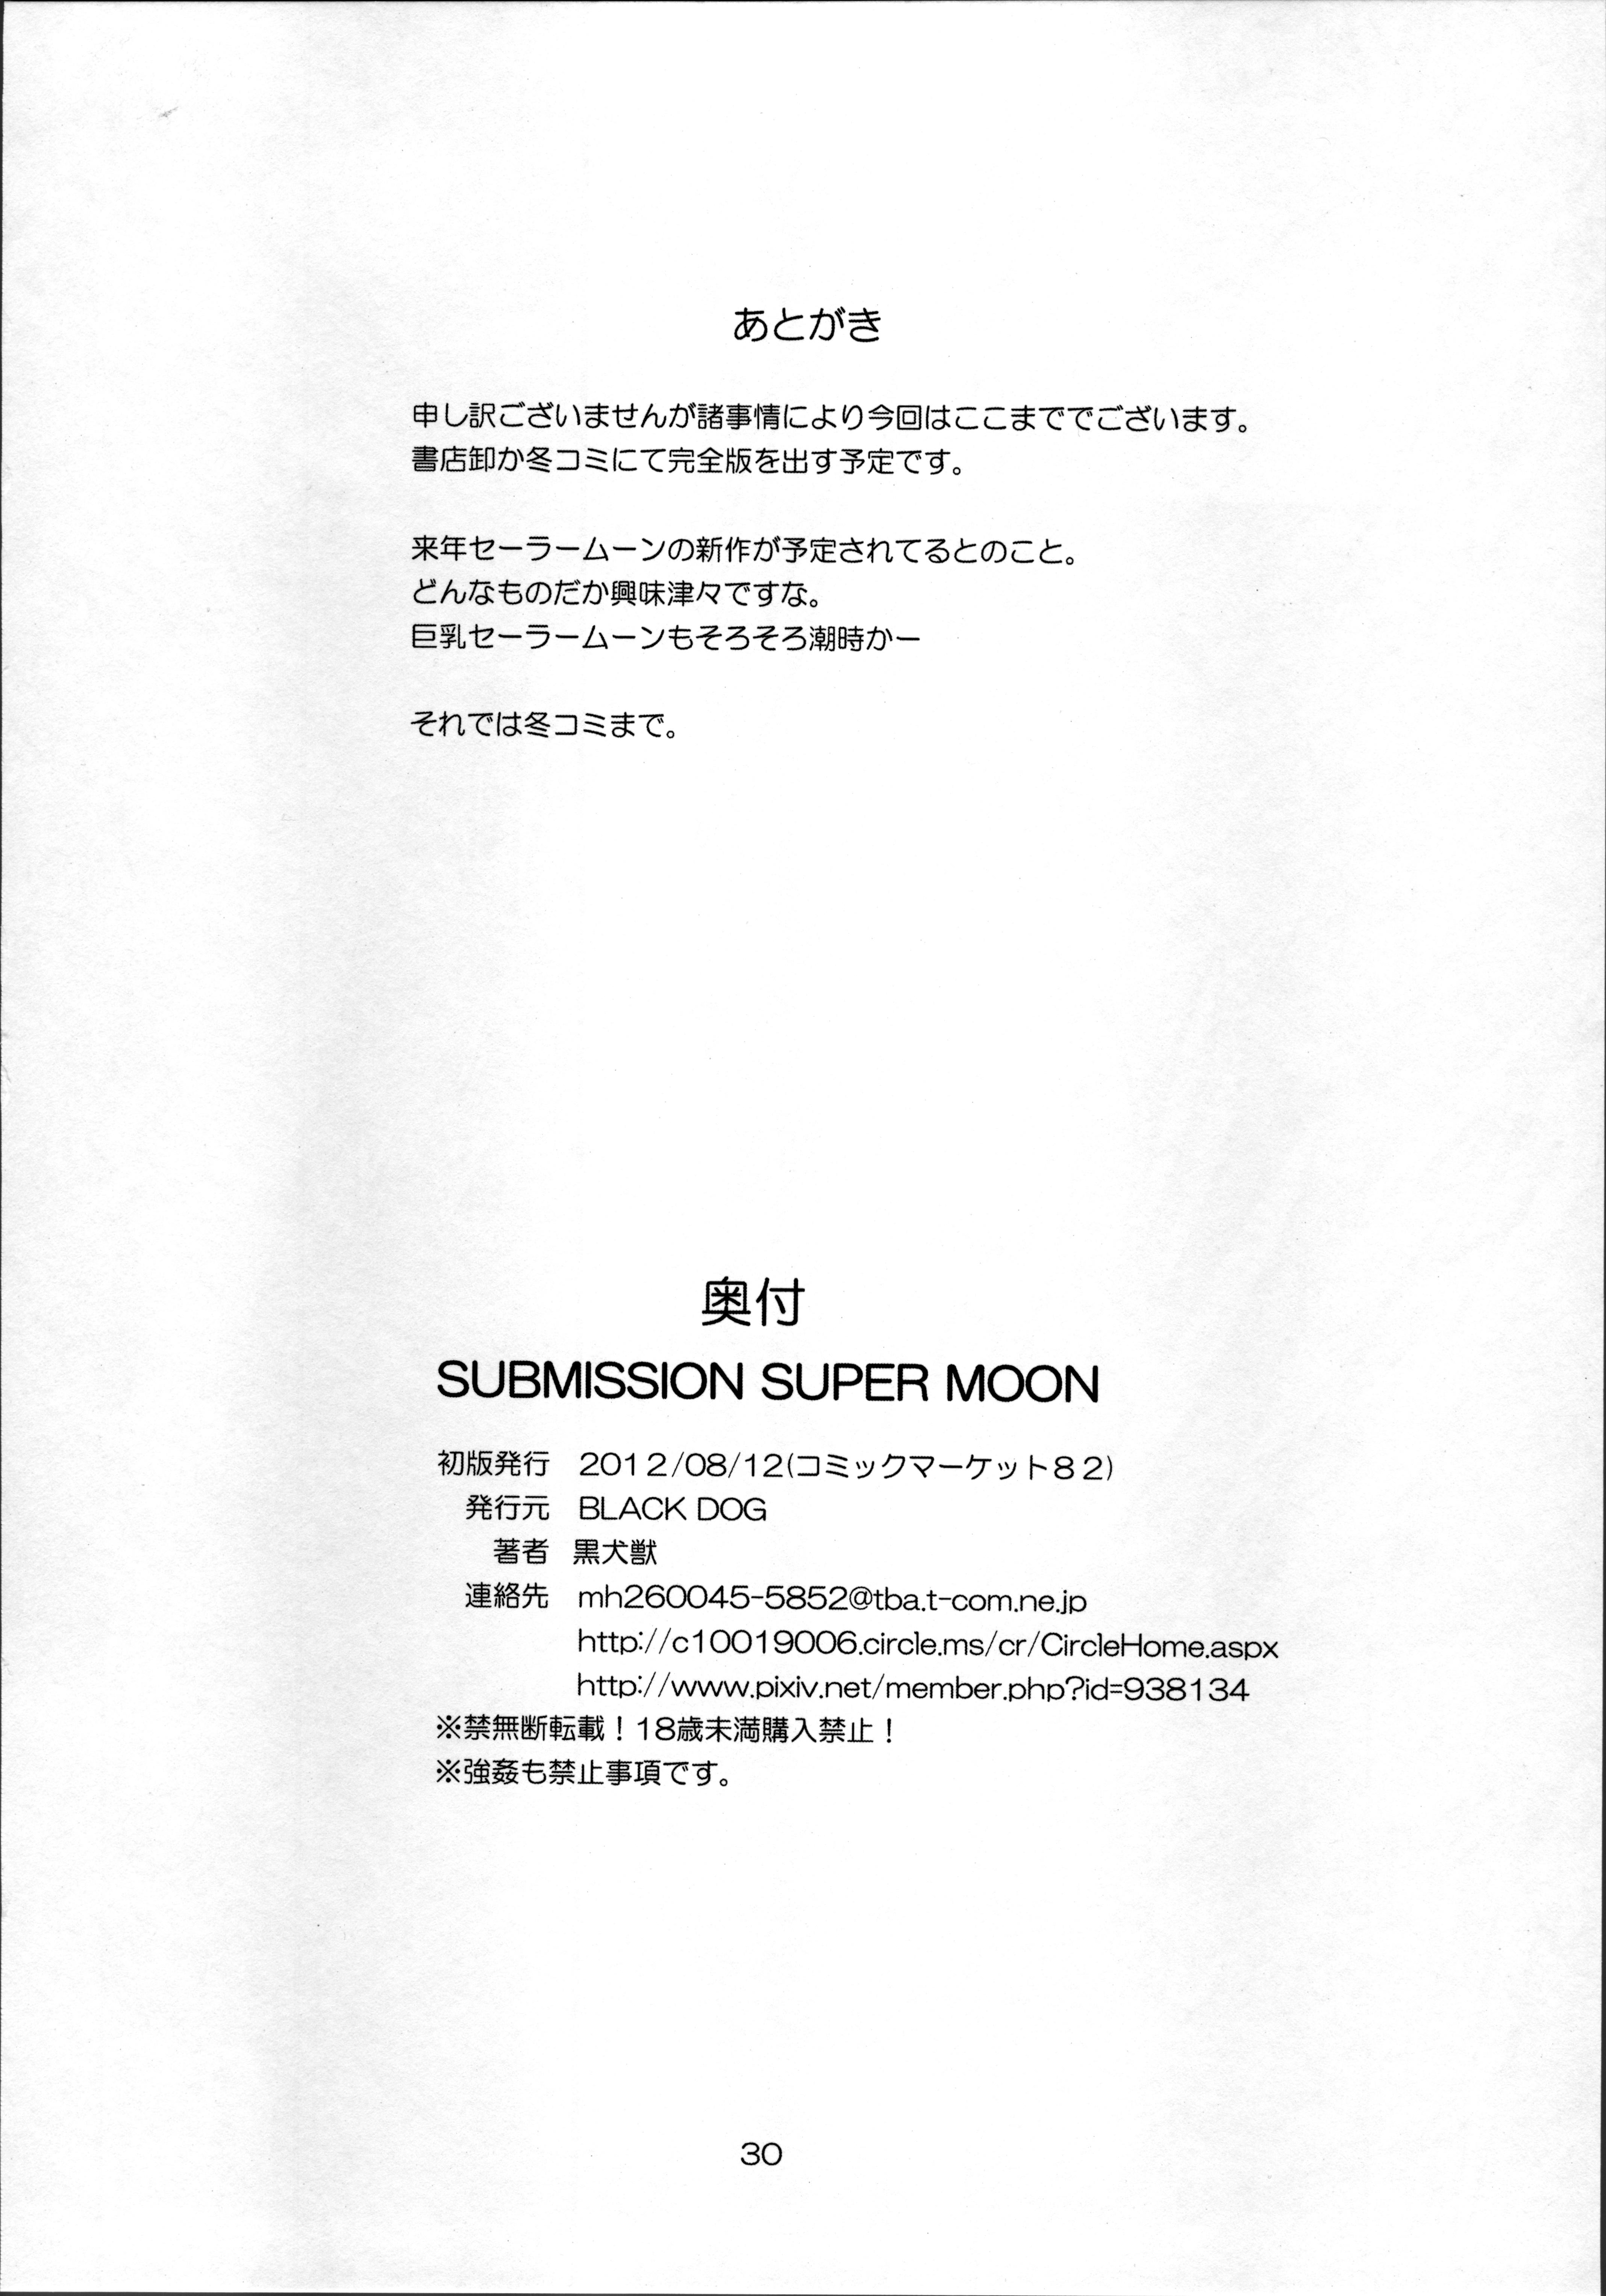 Making Love Porn SUBMISSION-SUPER MOON Zanteiban - Sailor moon Sloppy Blowjob - Page 30